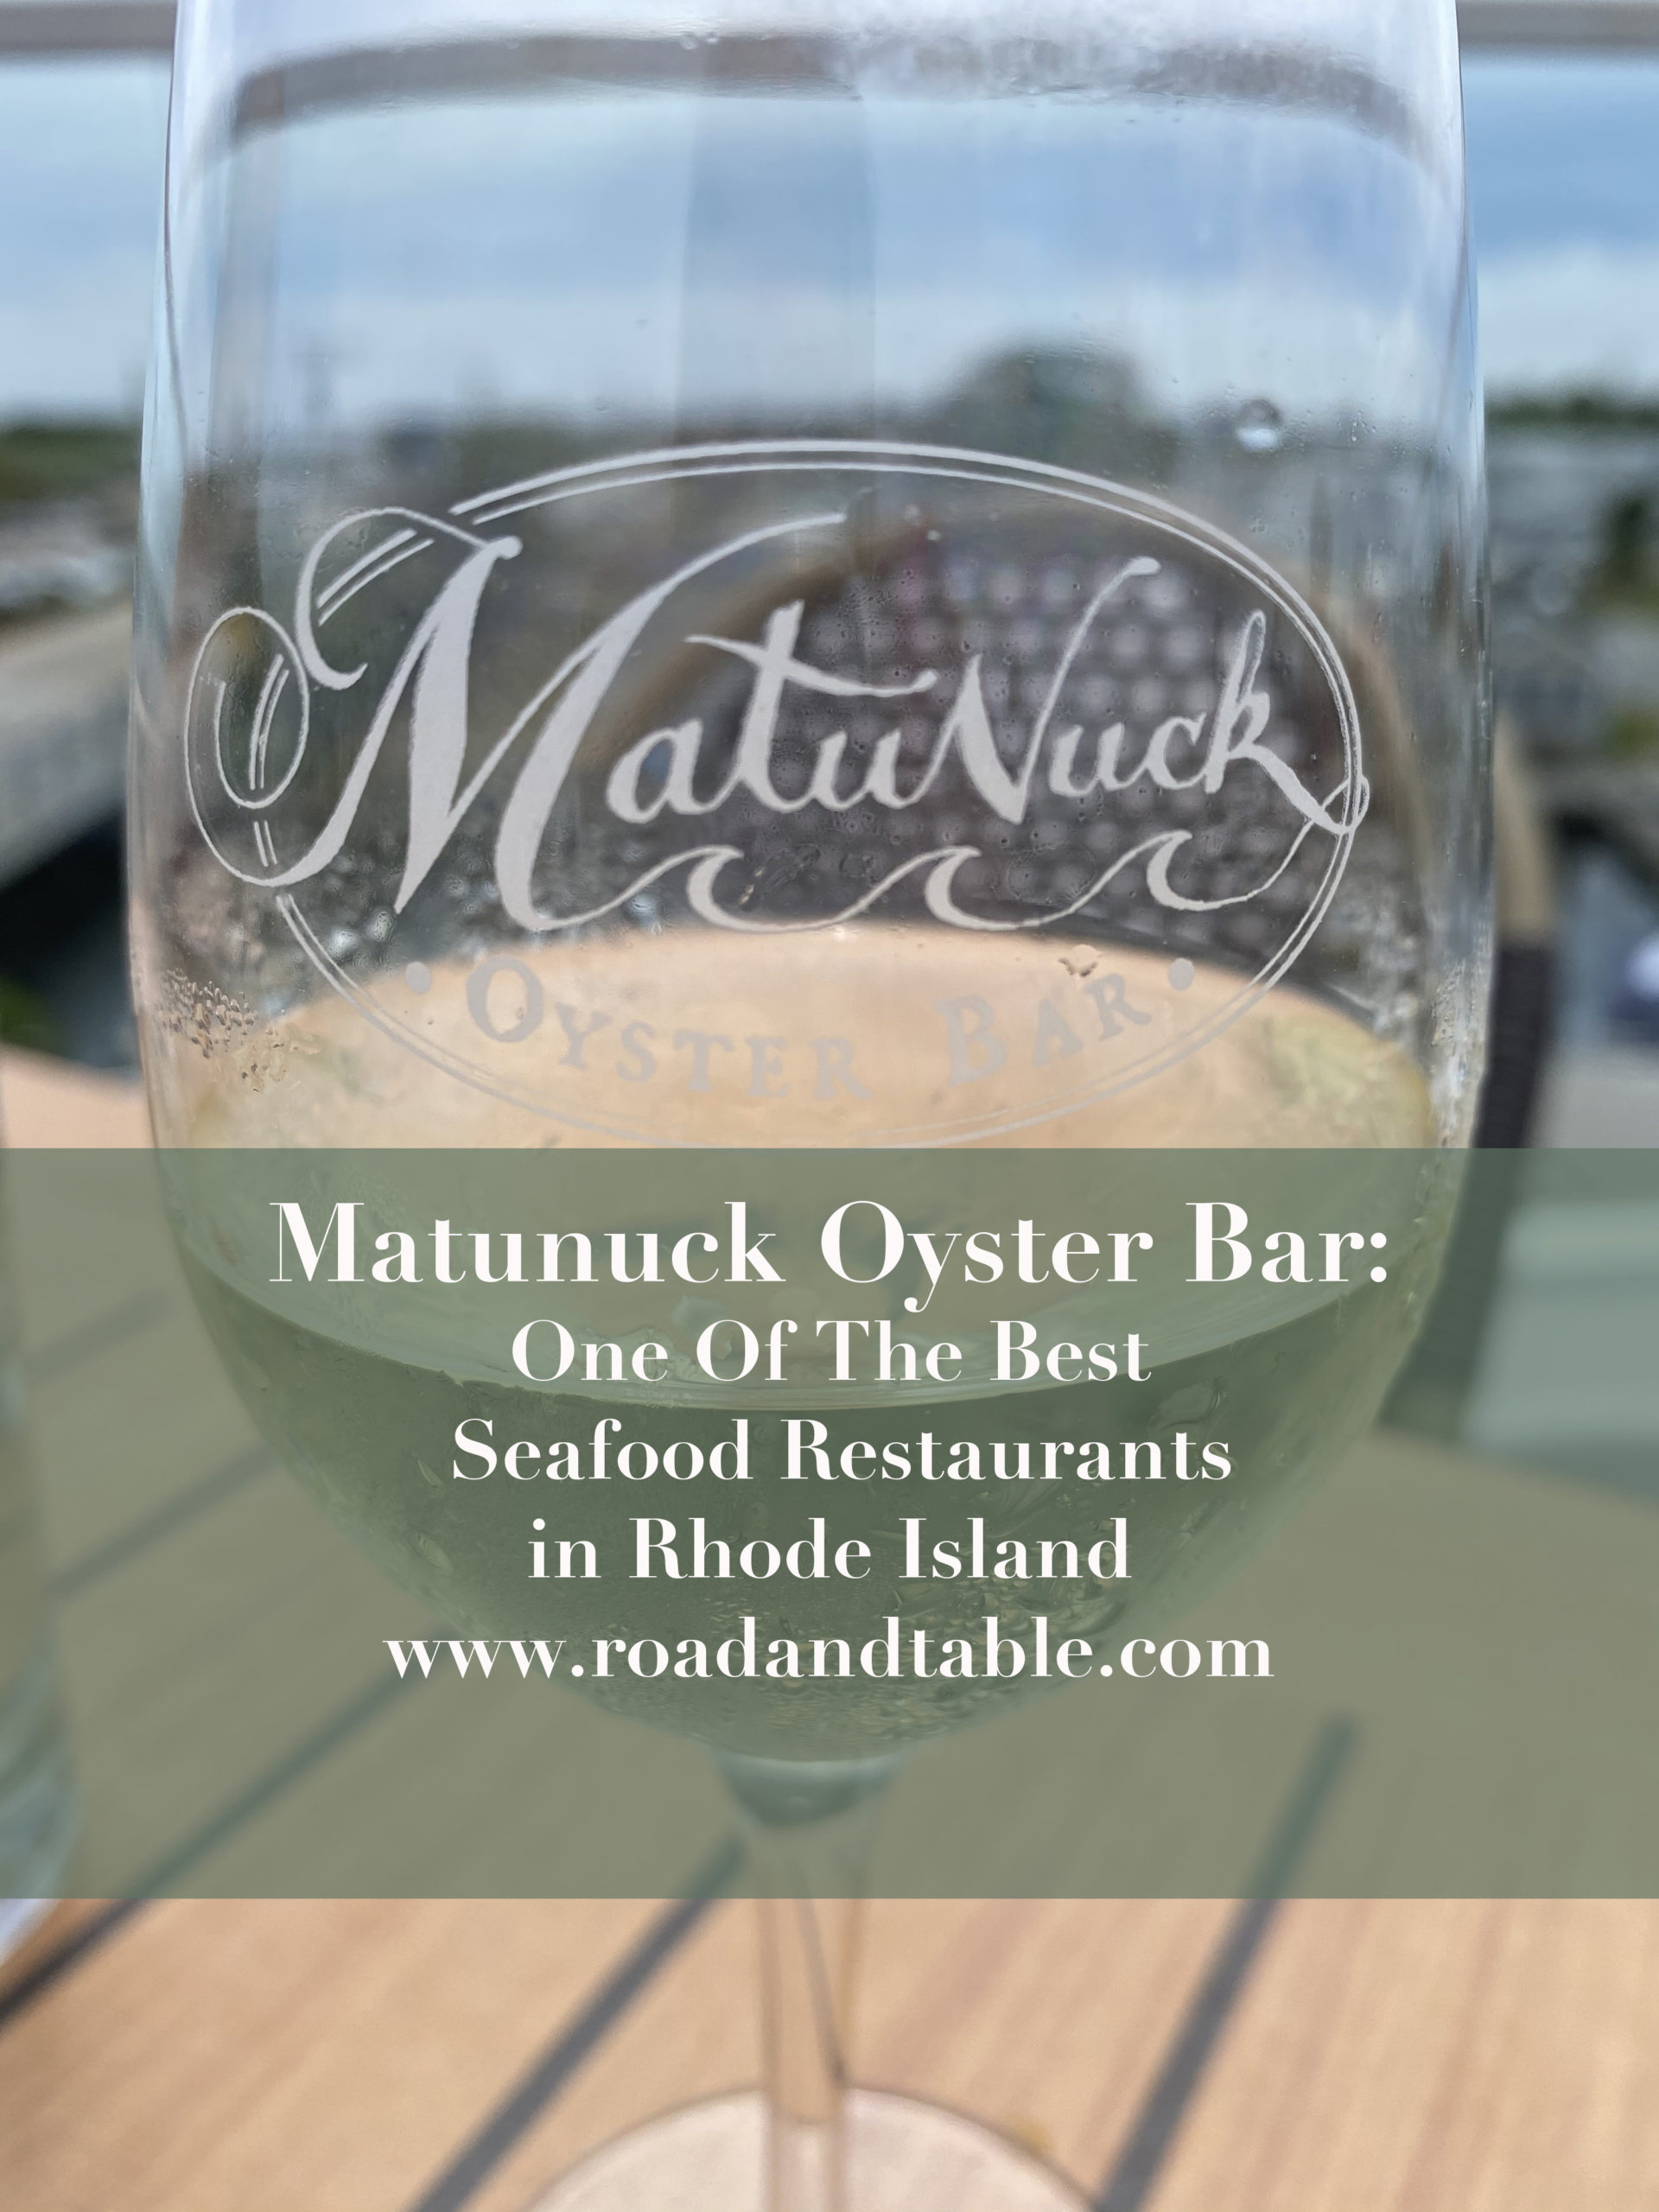 Matunuck Oyster Bar A South Kingstown, RI Seafood Delight. One of the